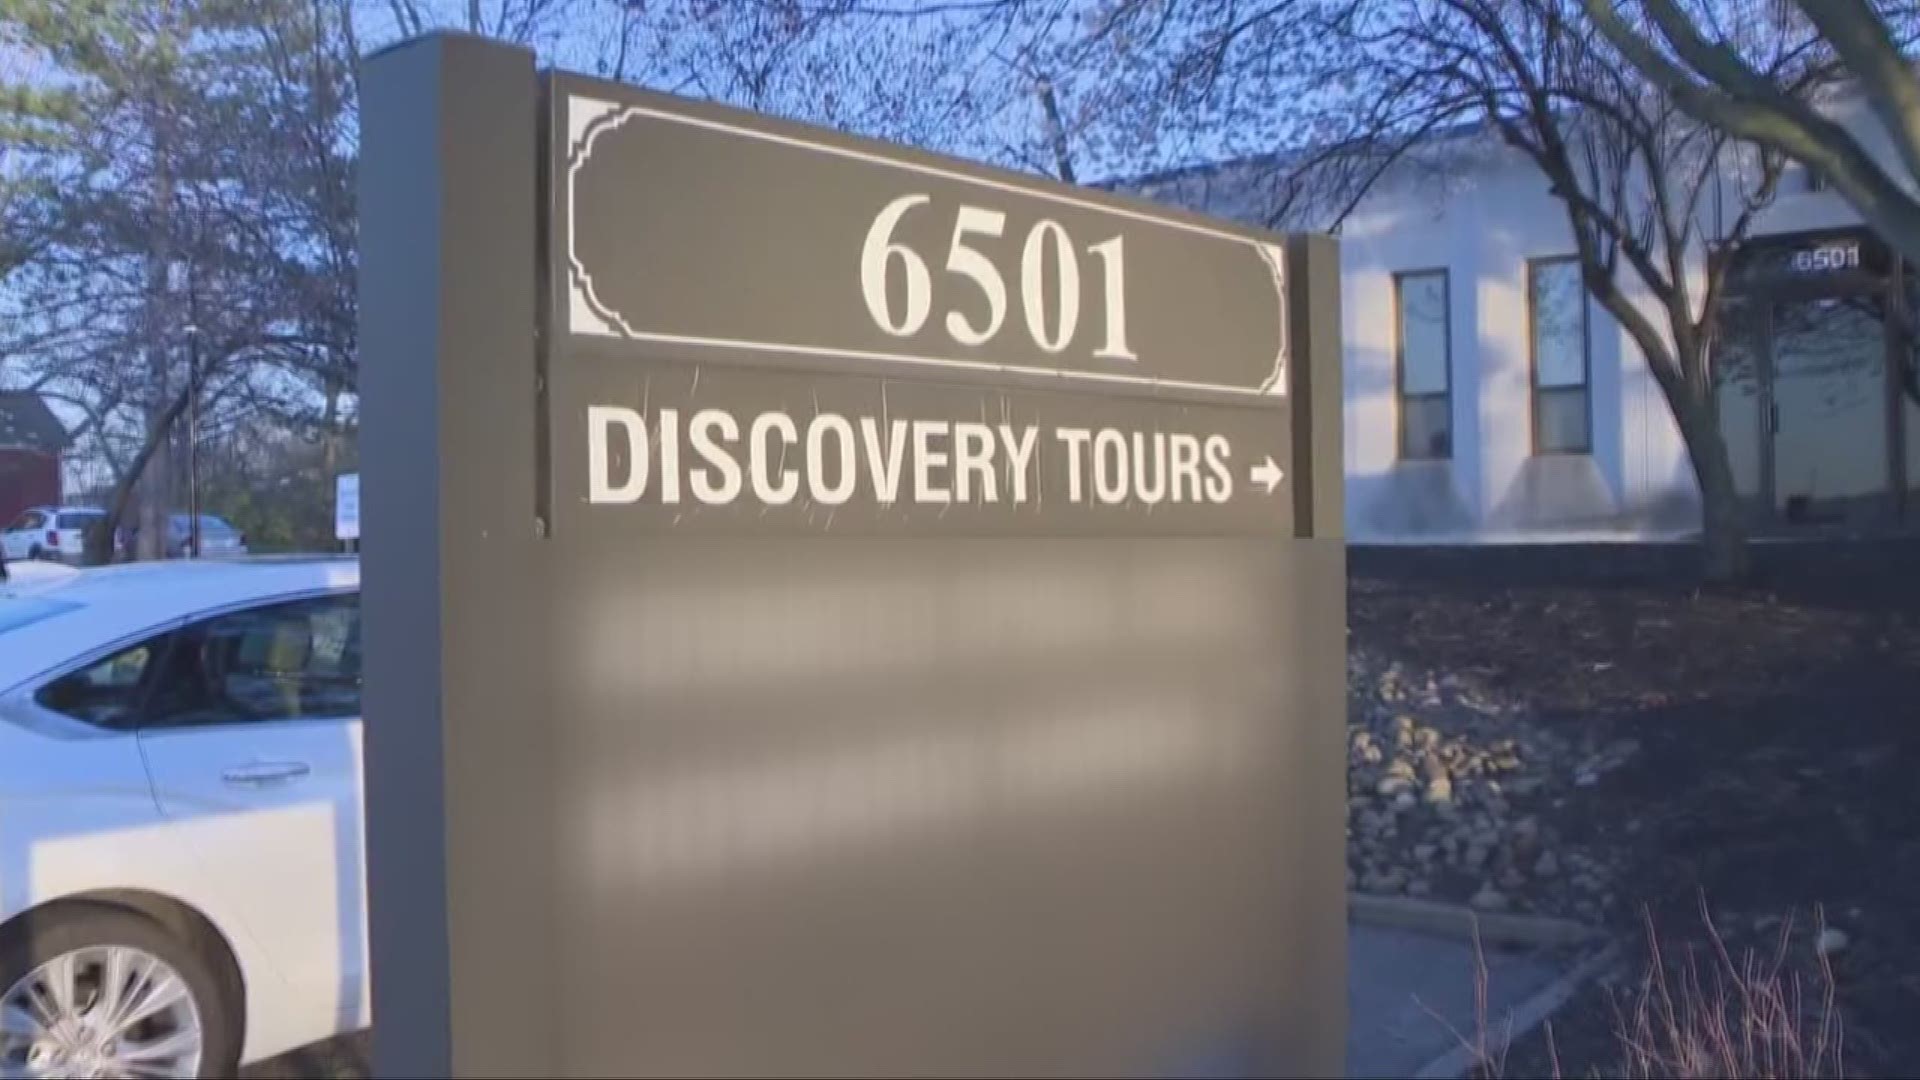 As complaints against Discovery Tours surge, company files for bankruptcy